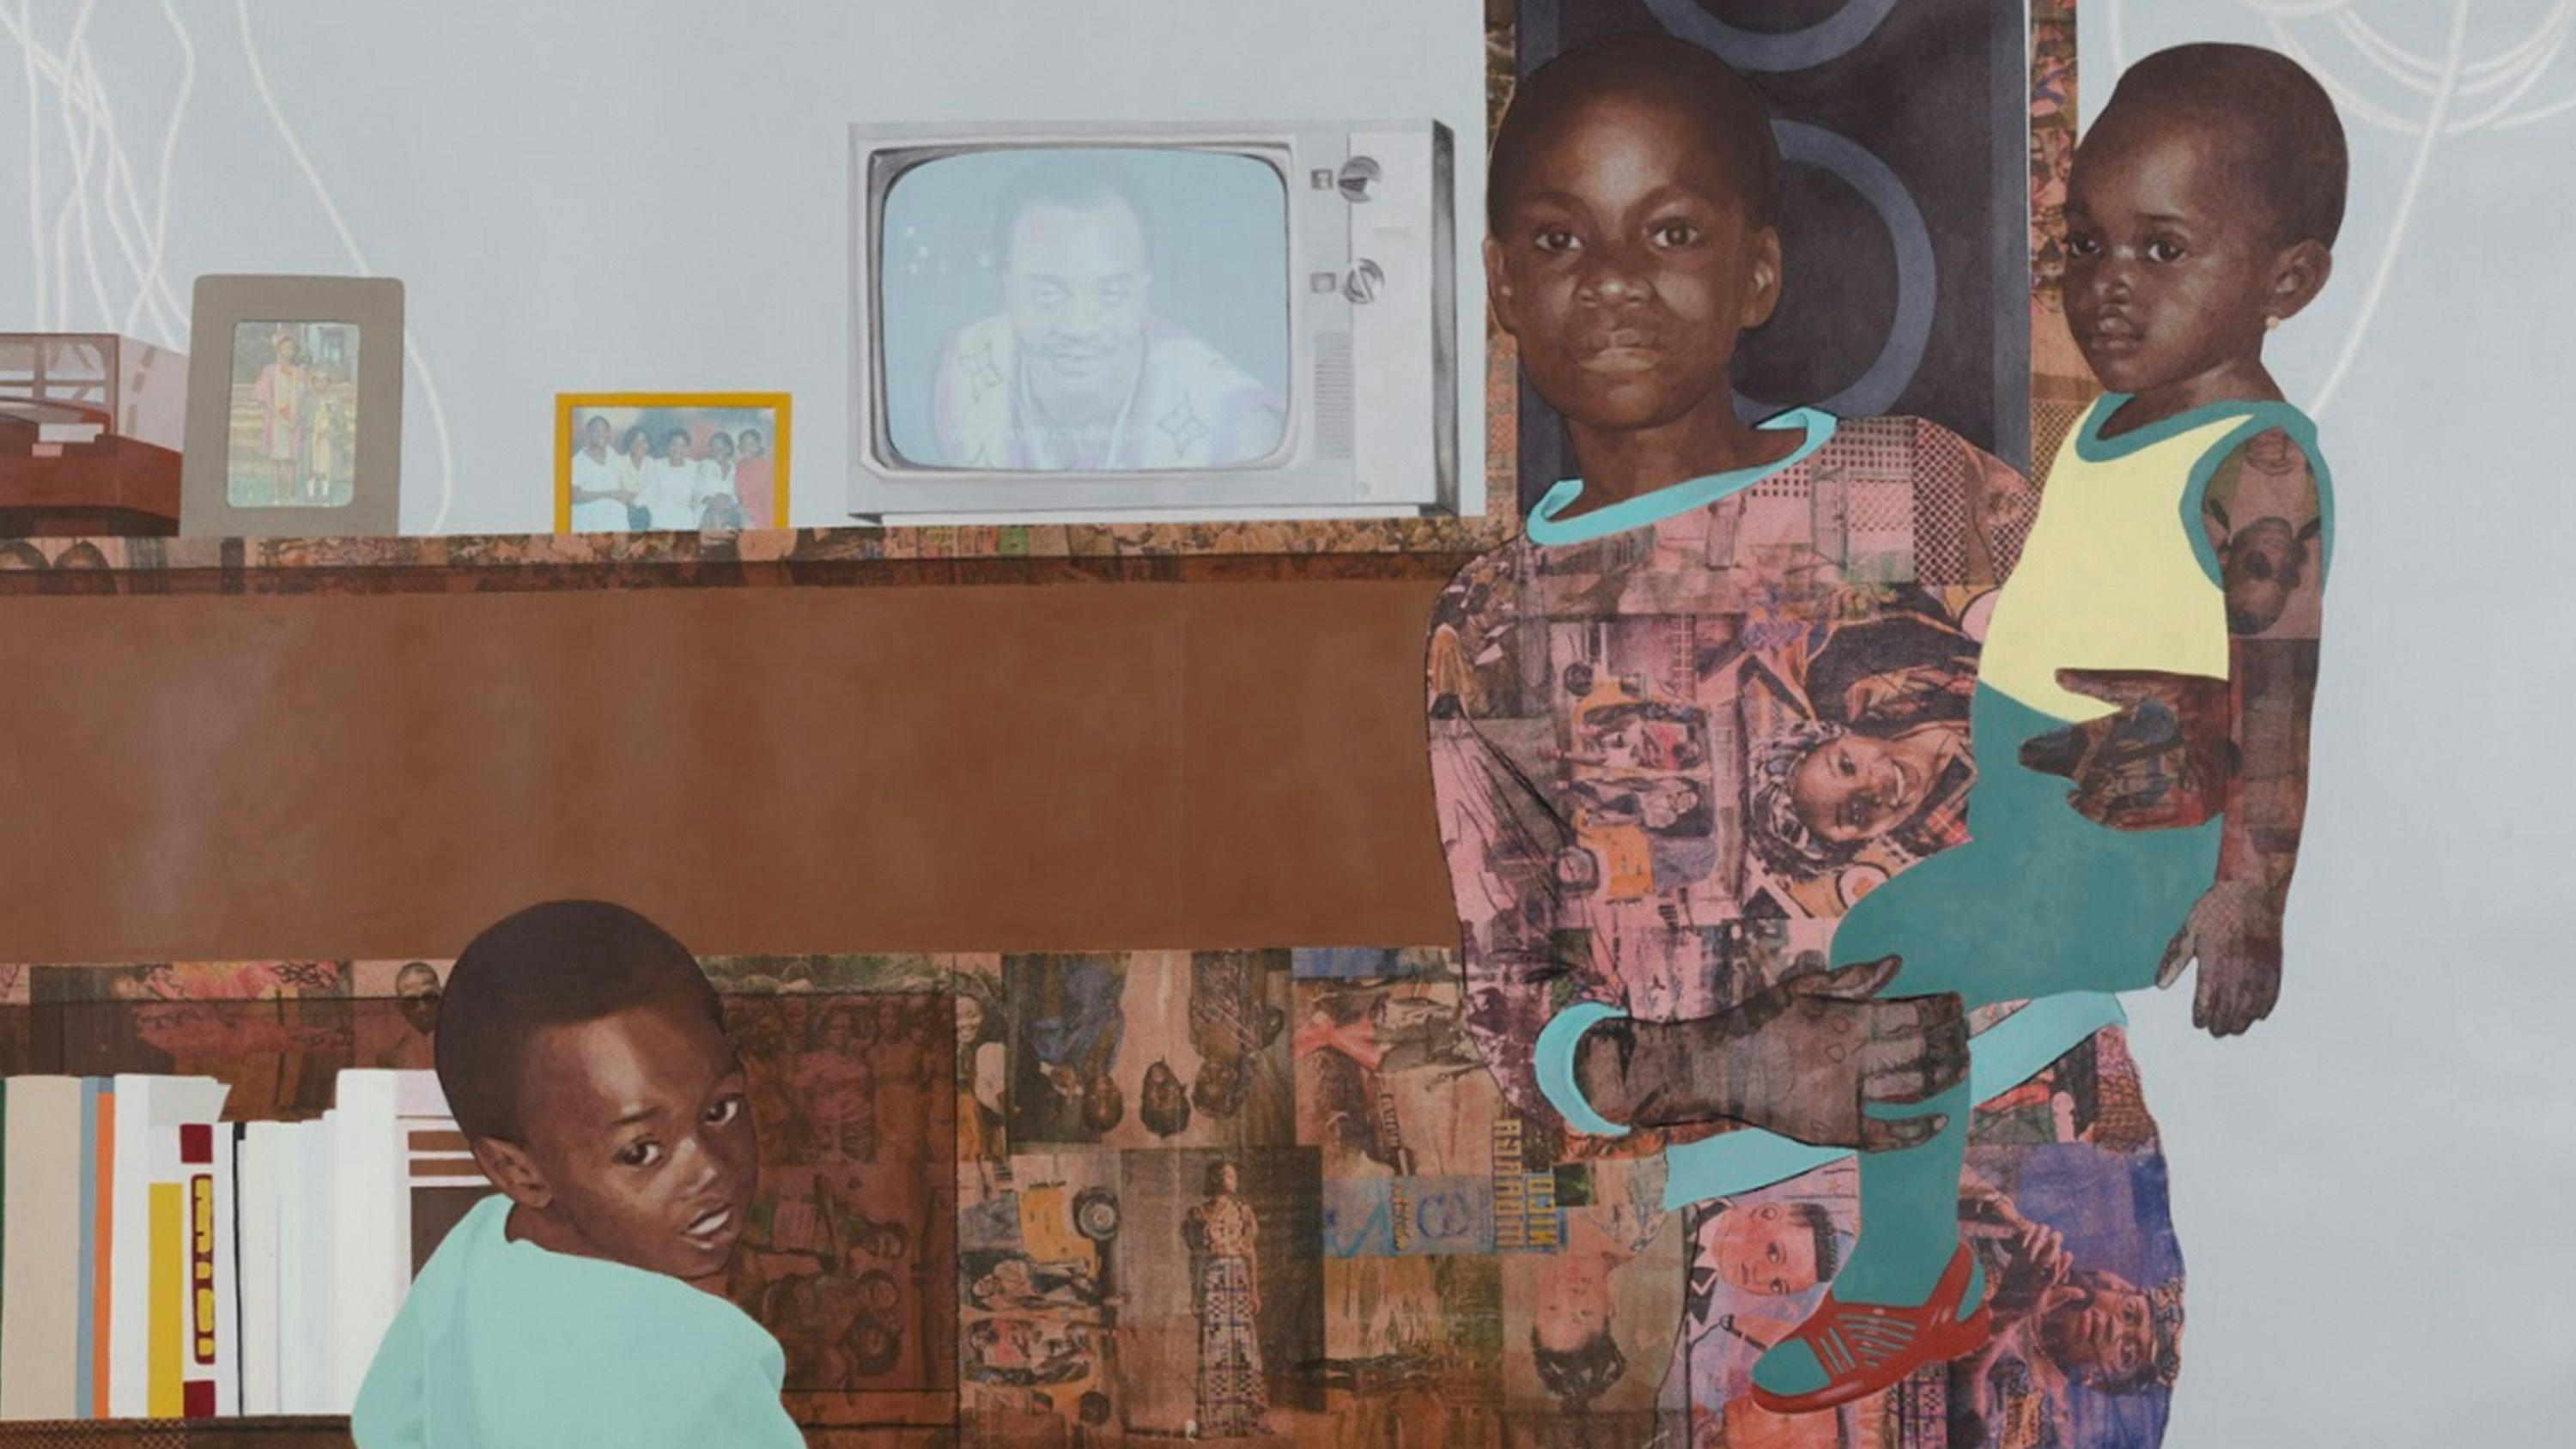 A detailed view of Njideka Akunyili Crosby’s "The Beautyful Ones" Series #9, dated 2018